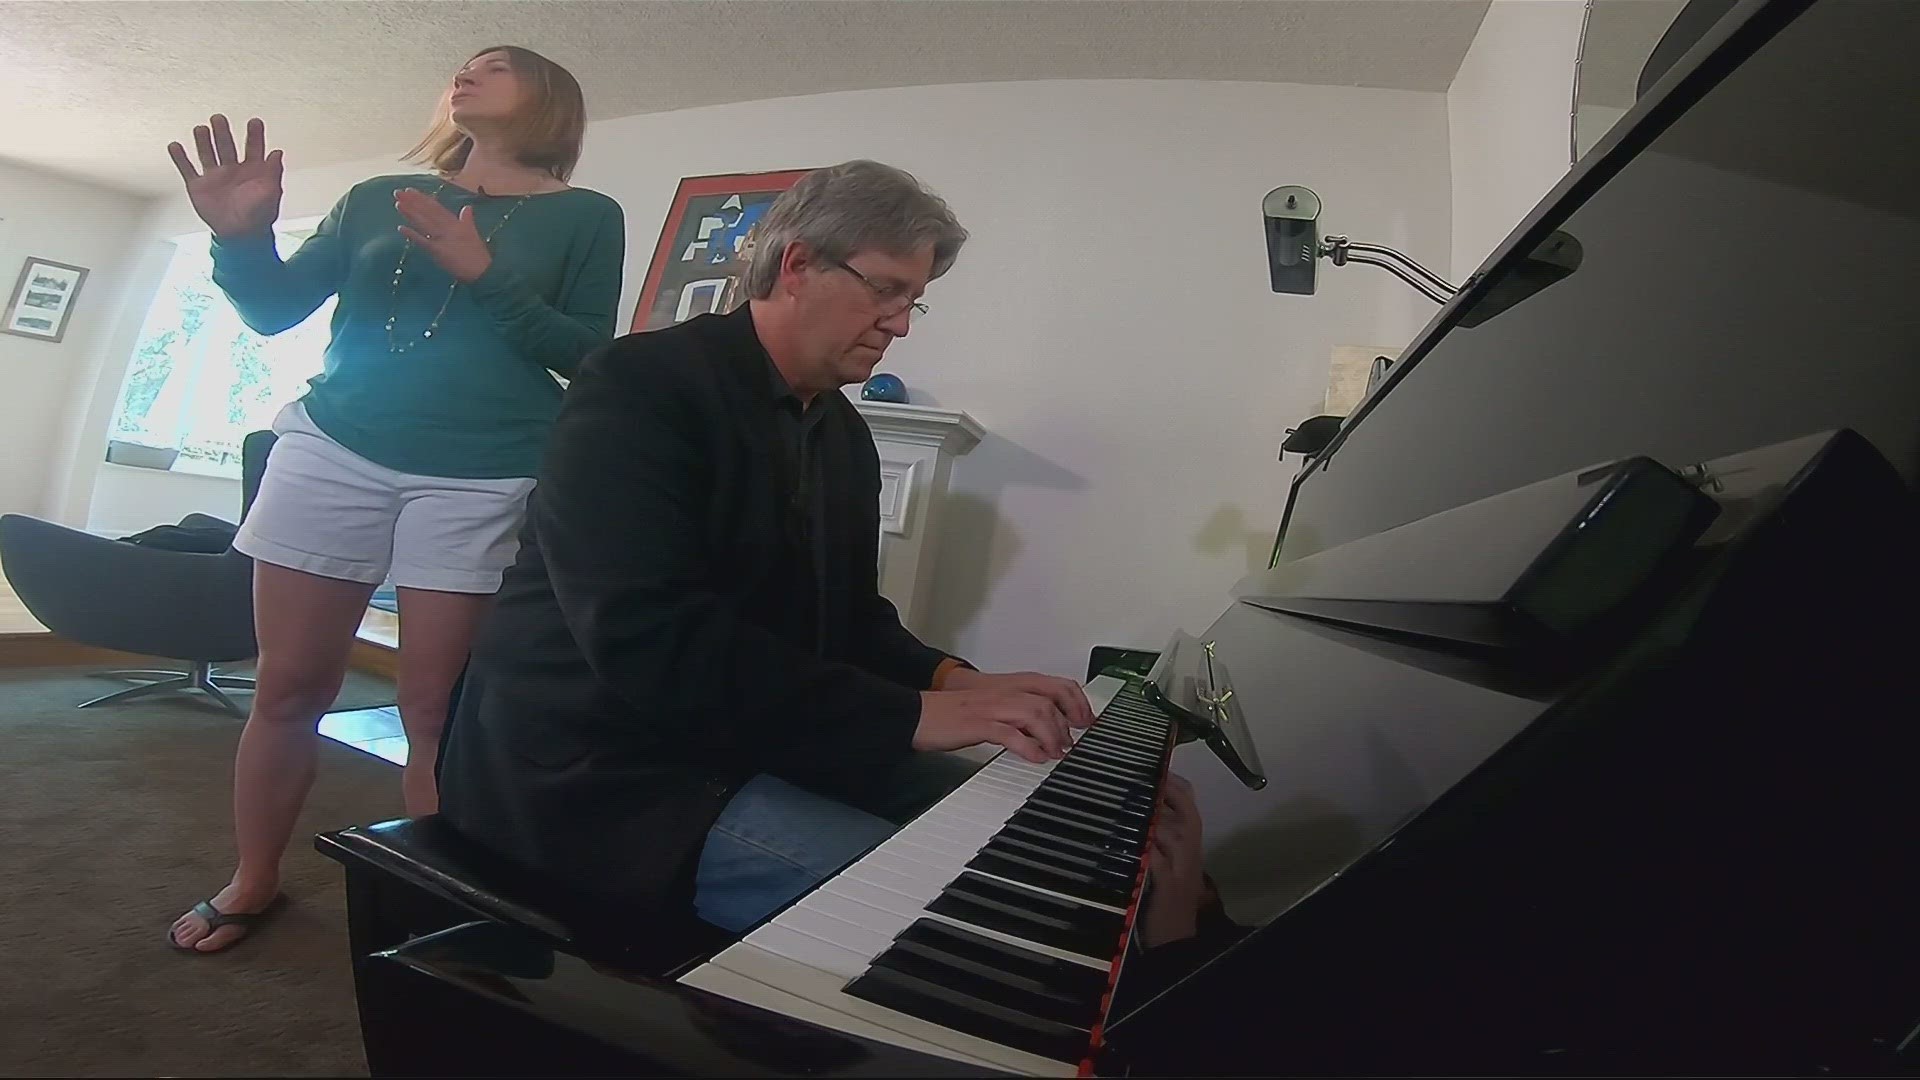 OHSU Neuroscientist Larry Sherman and musician Naomi Laviolette are pulling together their musical show 'Every Brain Needs Music'. "